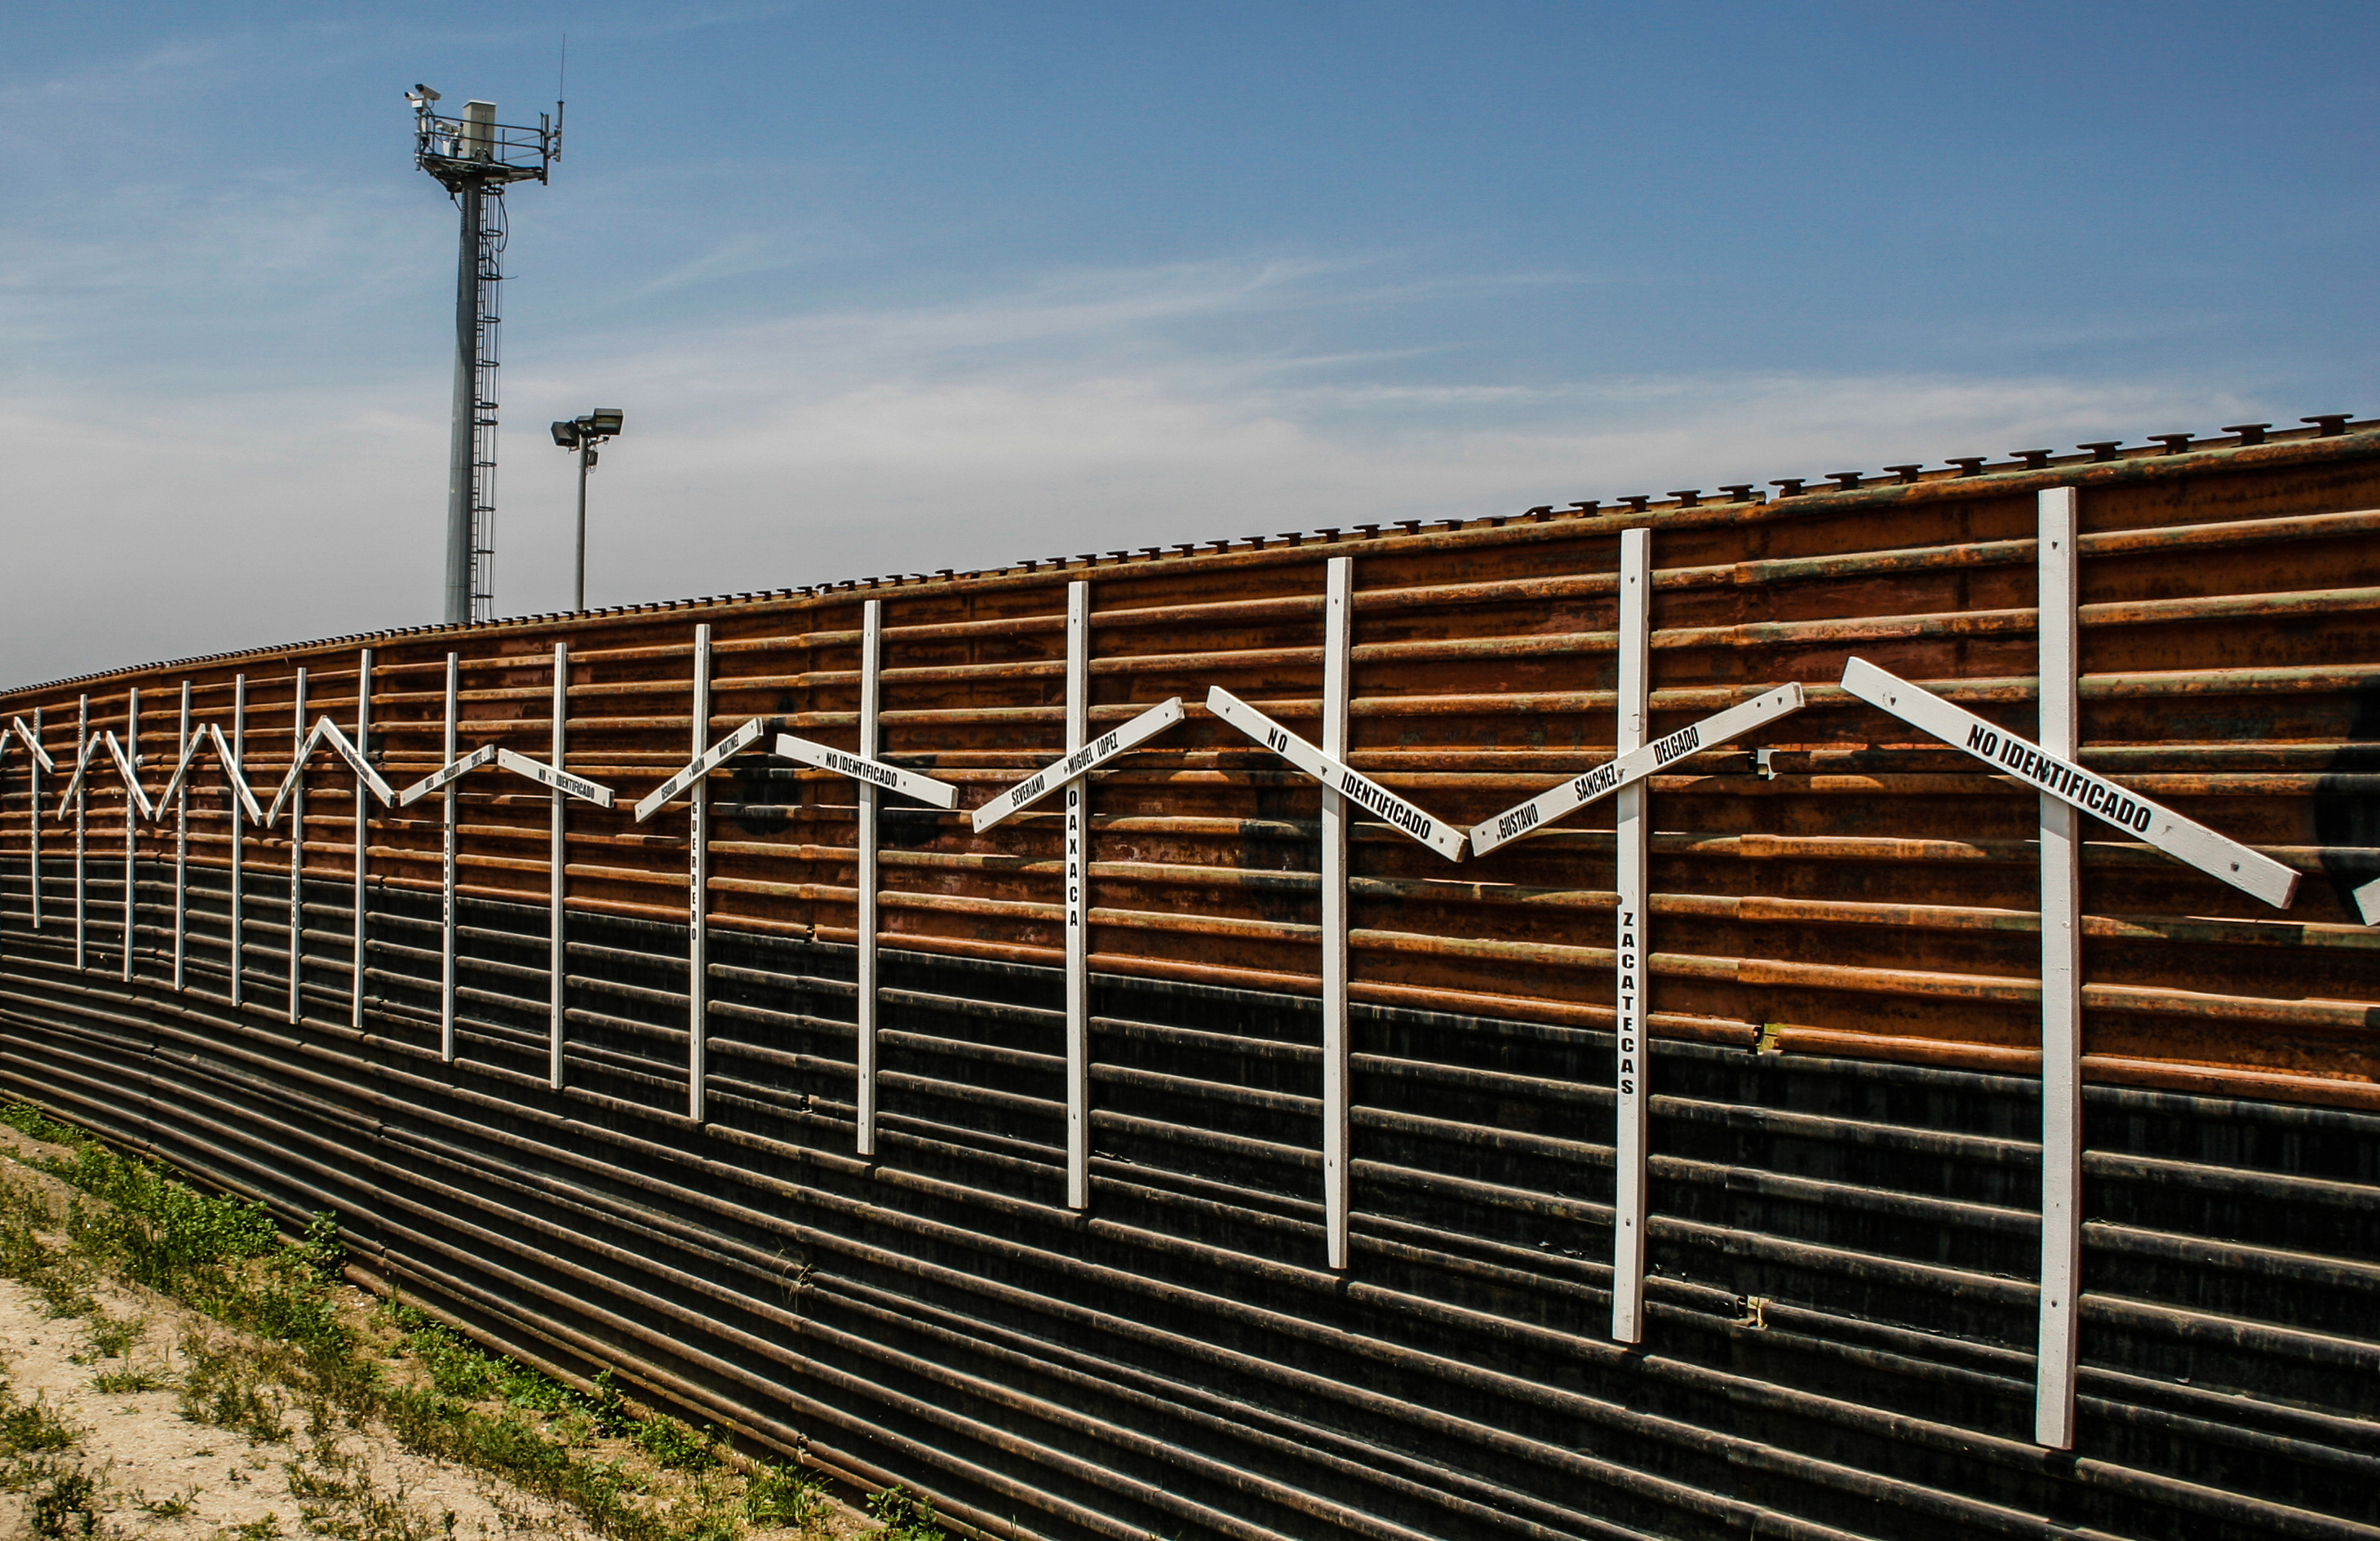 Three organizations sue to block $3.8 billion of military budget to be diverted to building border wall - JURIST